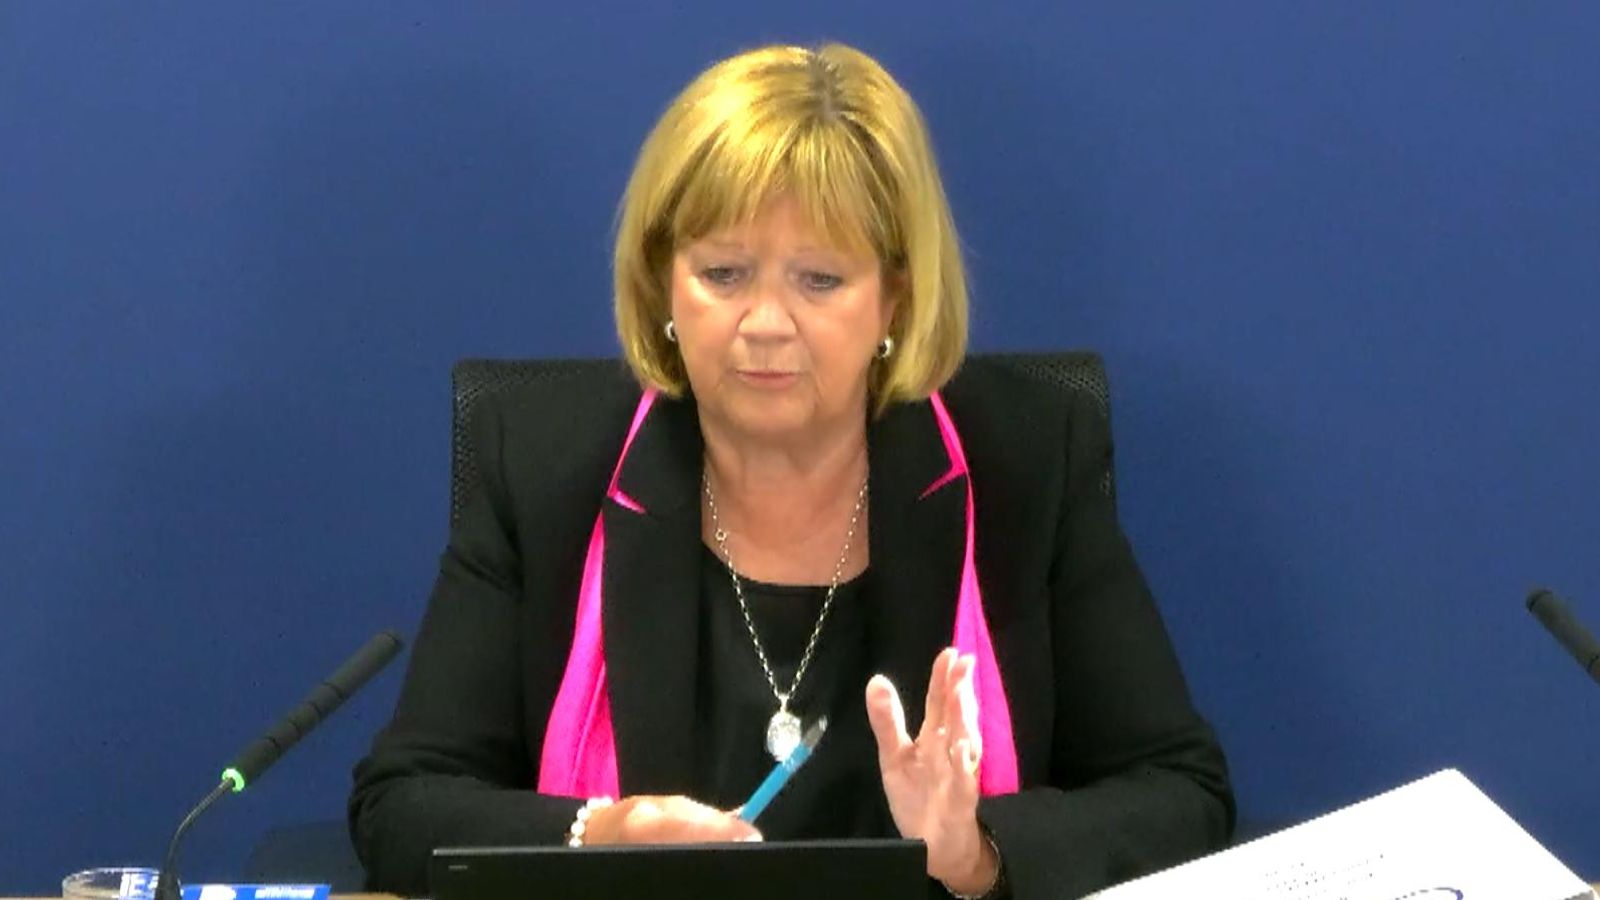 COVID inquiry chair insists it is for her to decide what material is 'relevant' amid row over Johnson WhatsApps